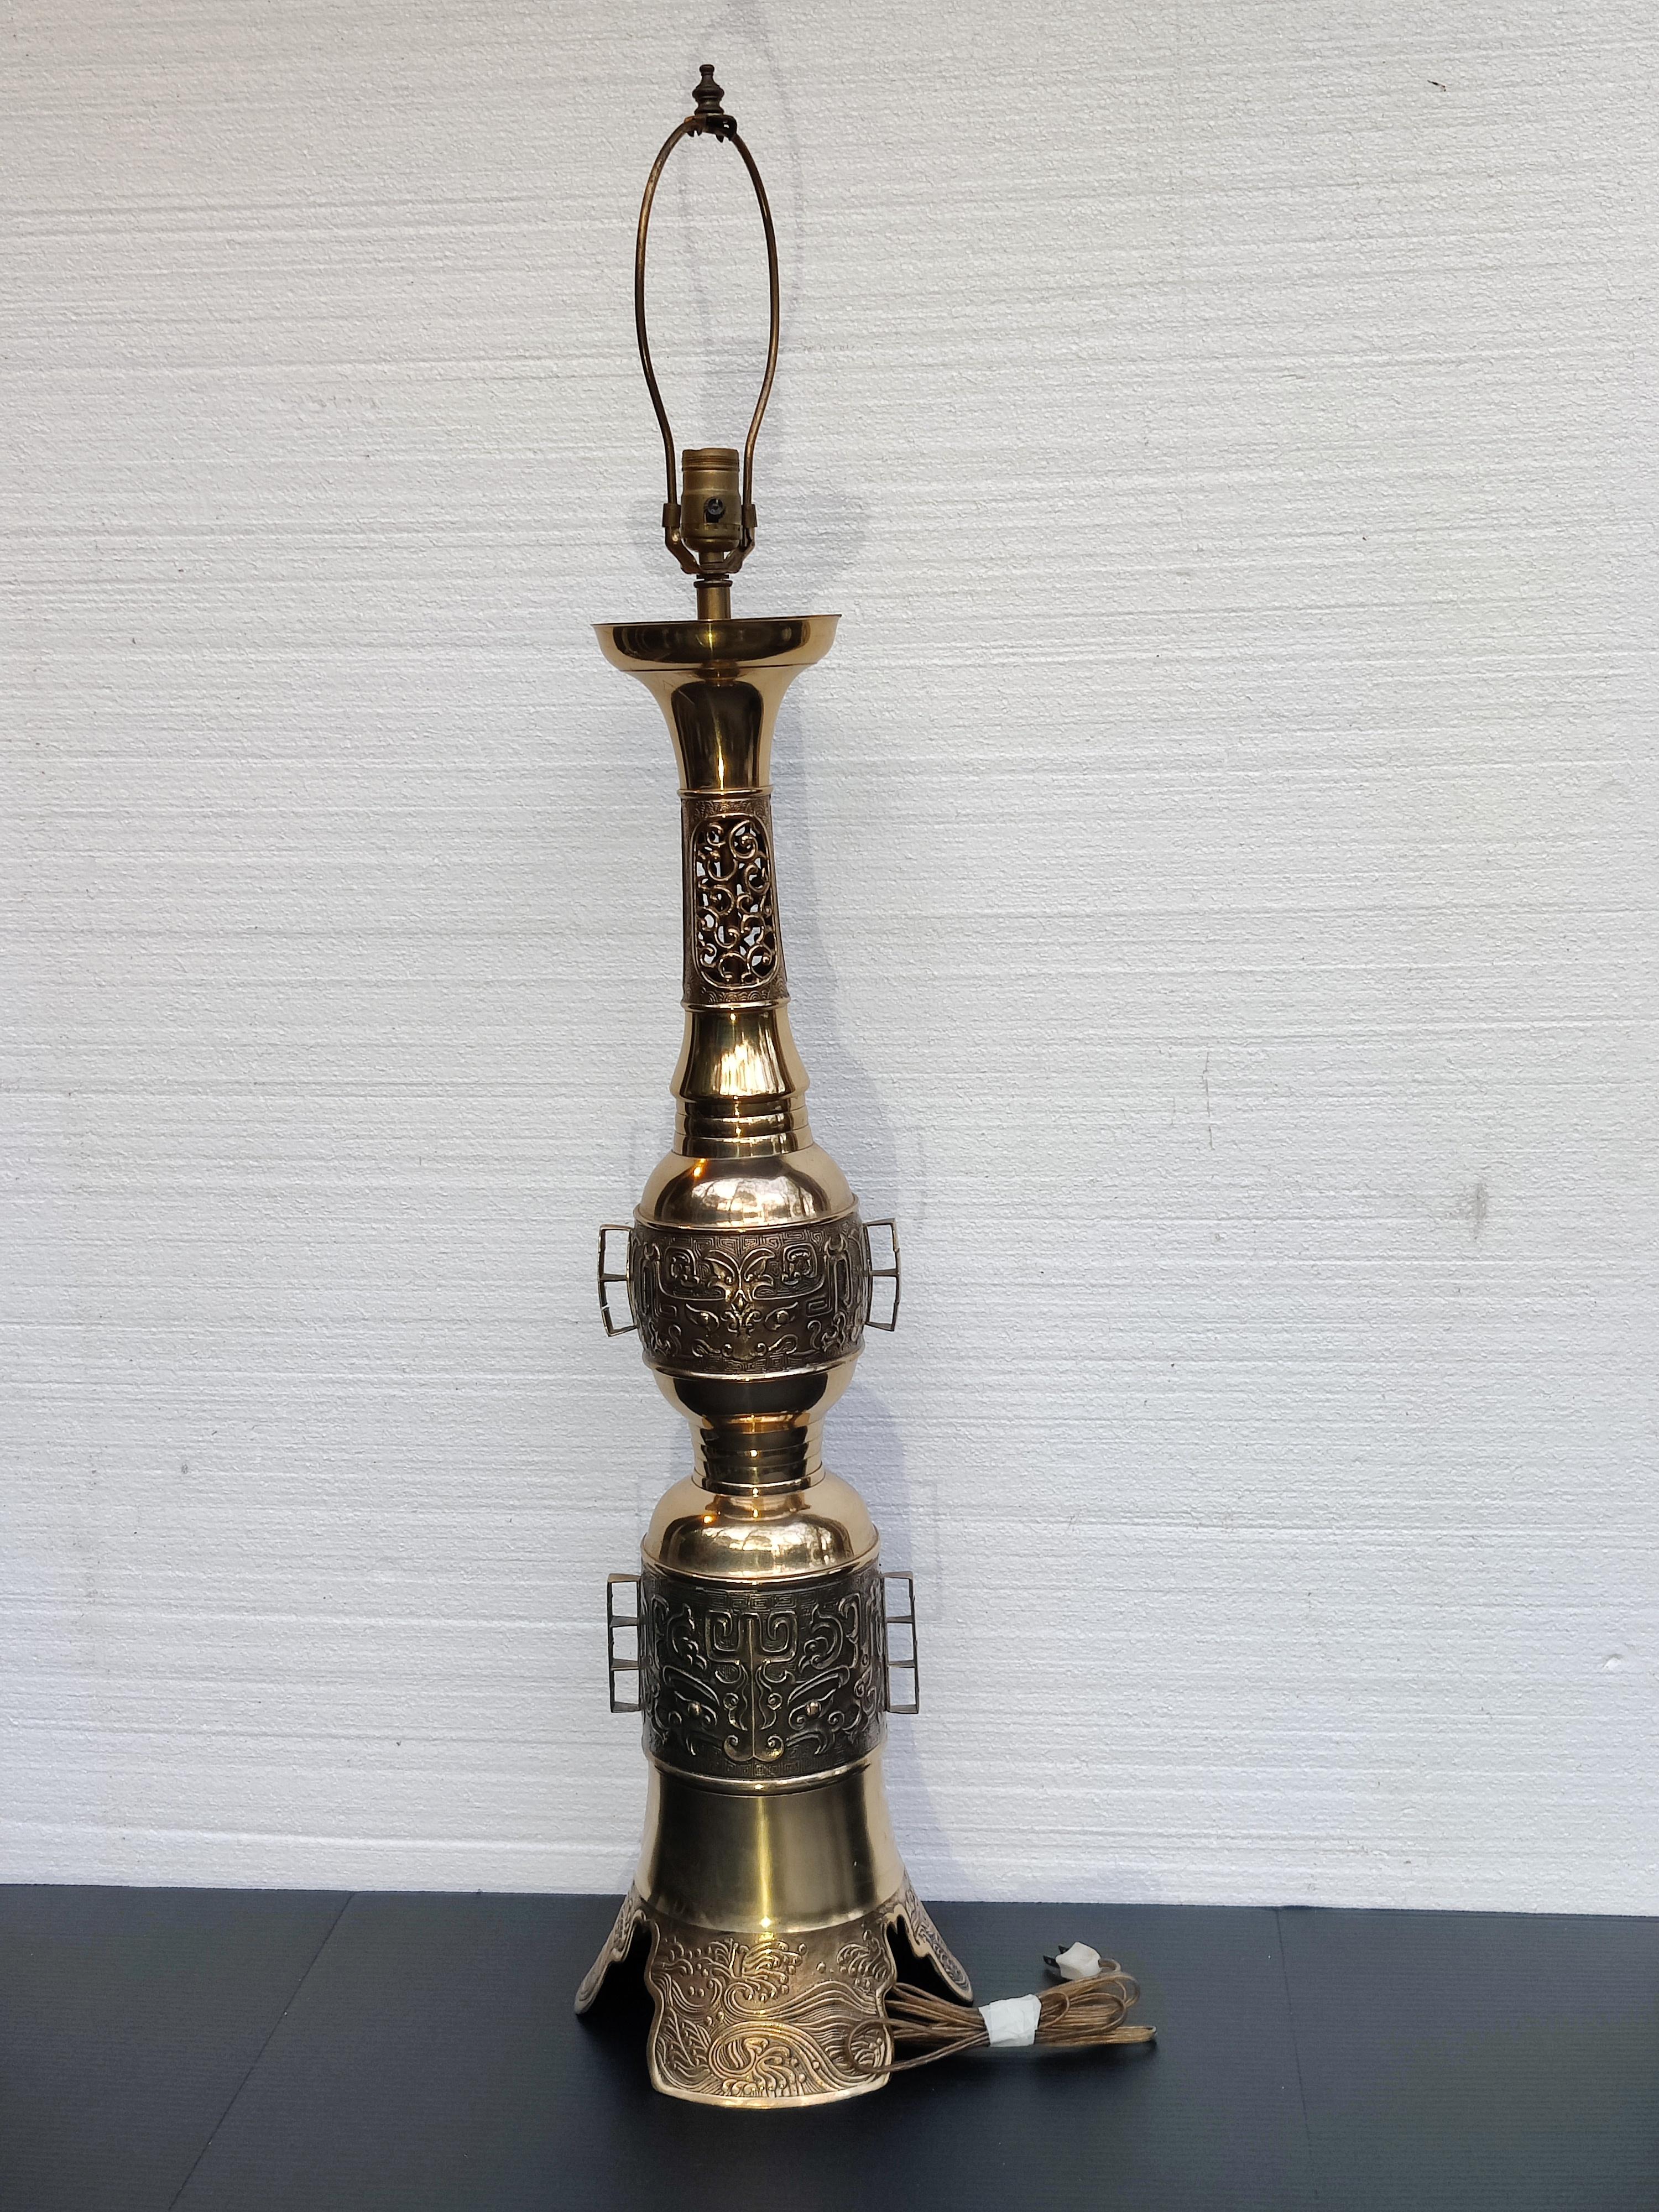 Hollywood Regency Asian Brass Lamp
1950 James Mont Attributed
Has a Korea Stamp on Base
Working Order
Base 10